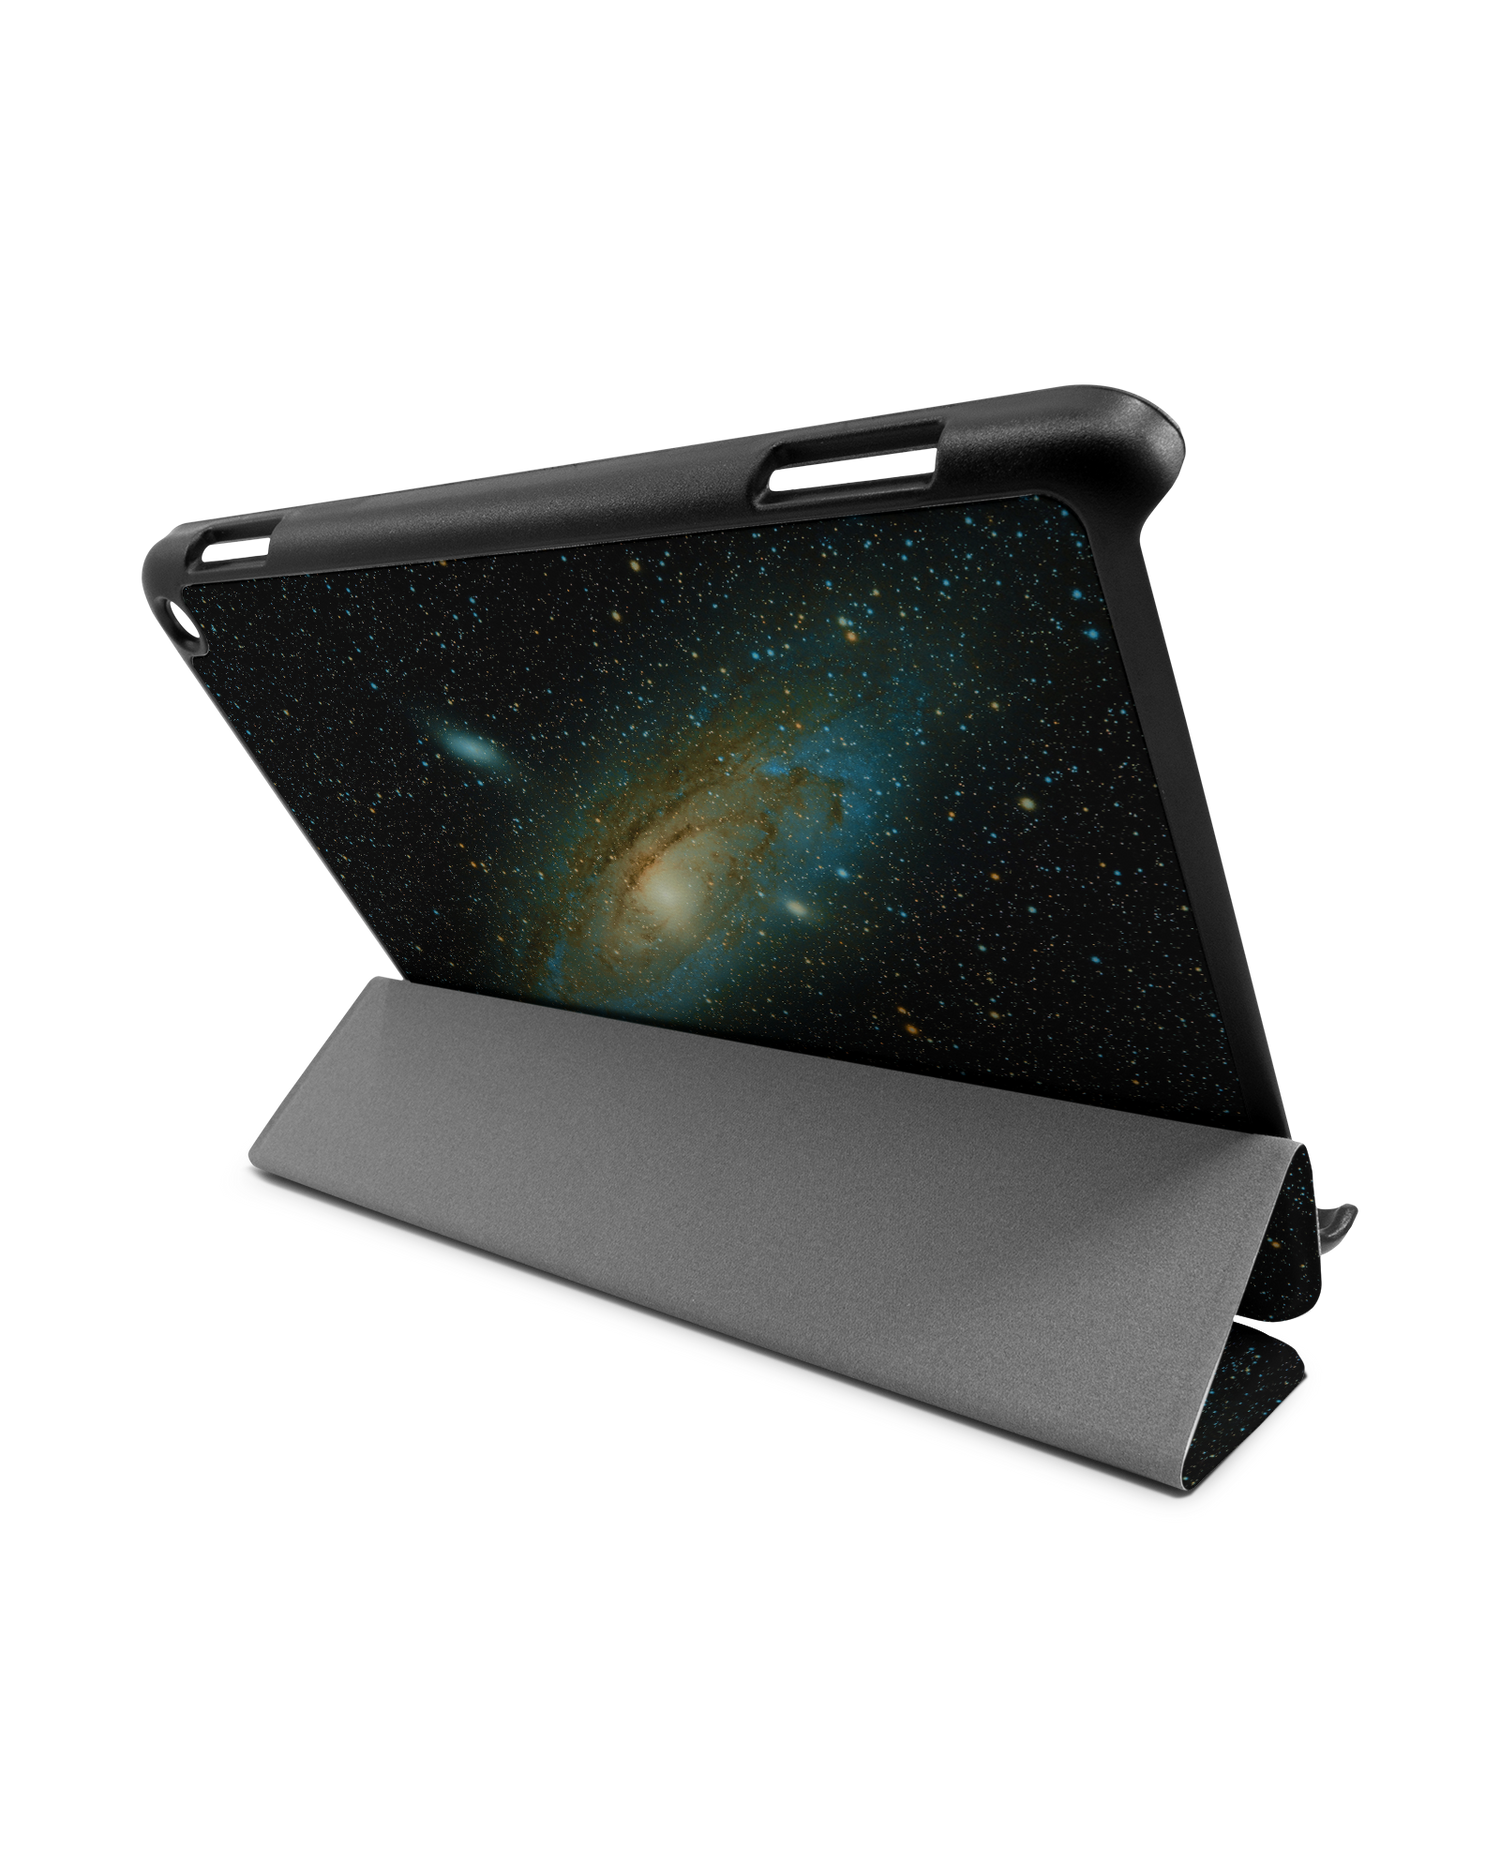 Outer Space Tablet Smart Case for Amazon Fire HD 8 (2022), Amazon Fire HD 8 Plus (2022), Amazon Fire HD 8 (2020), Amazon Fire HD 8 Plus (2020): Used as Stand